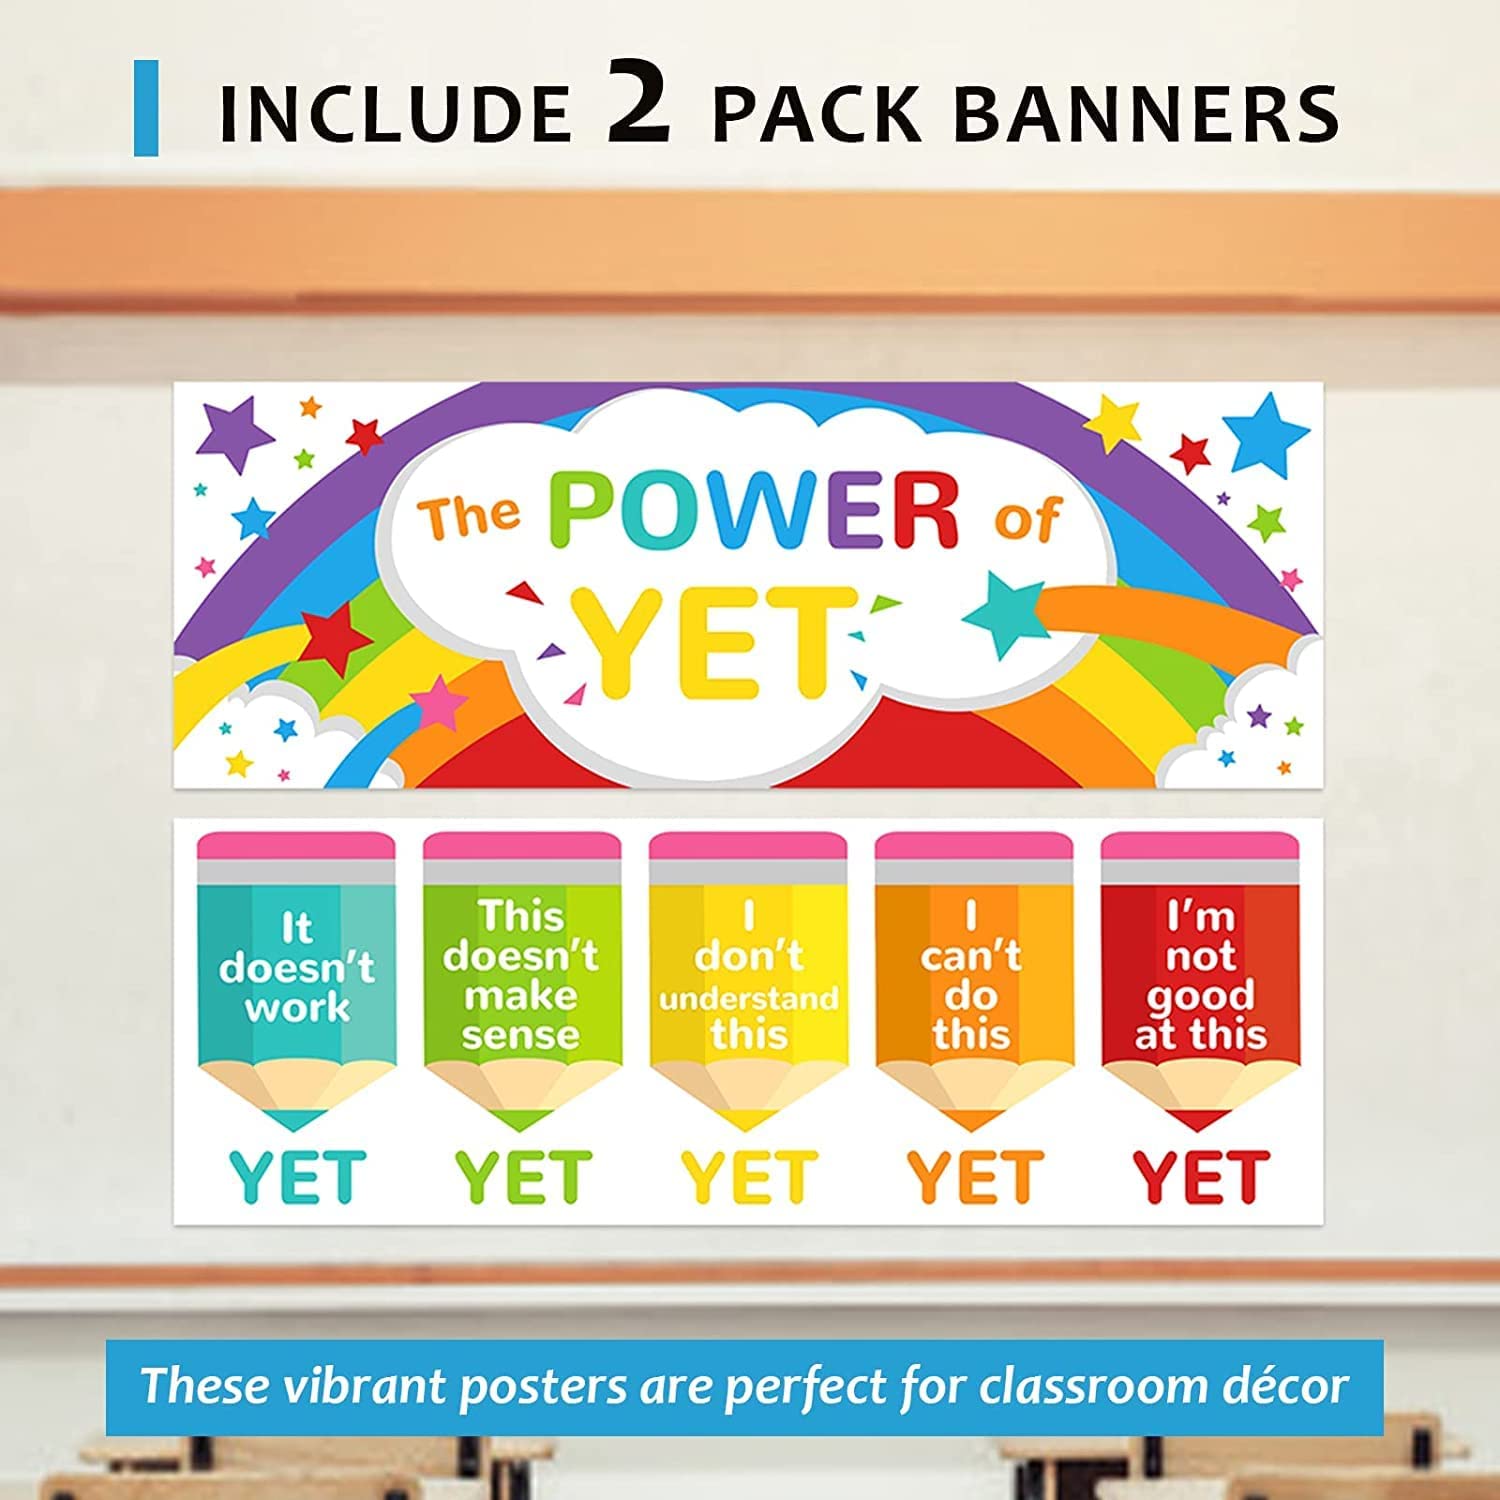 2 posters for schools with motivational phrases for classroom decorations